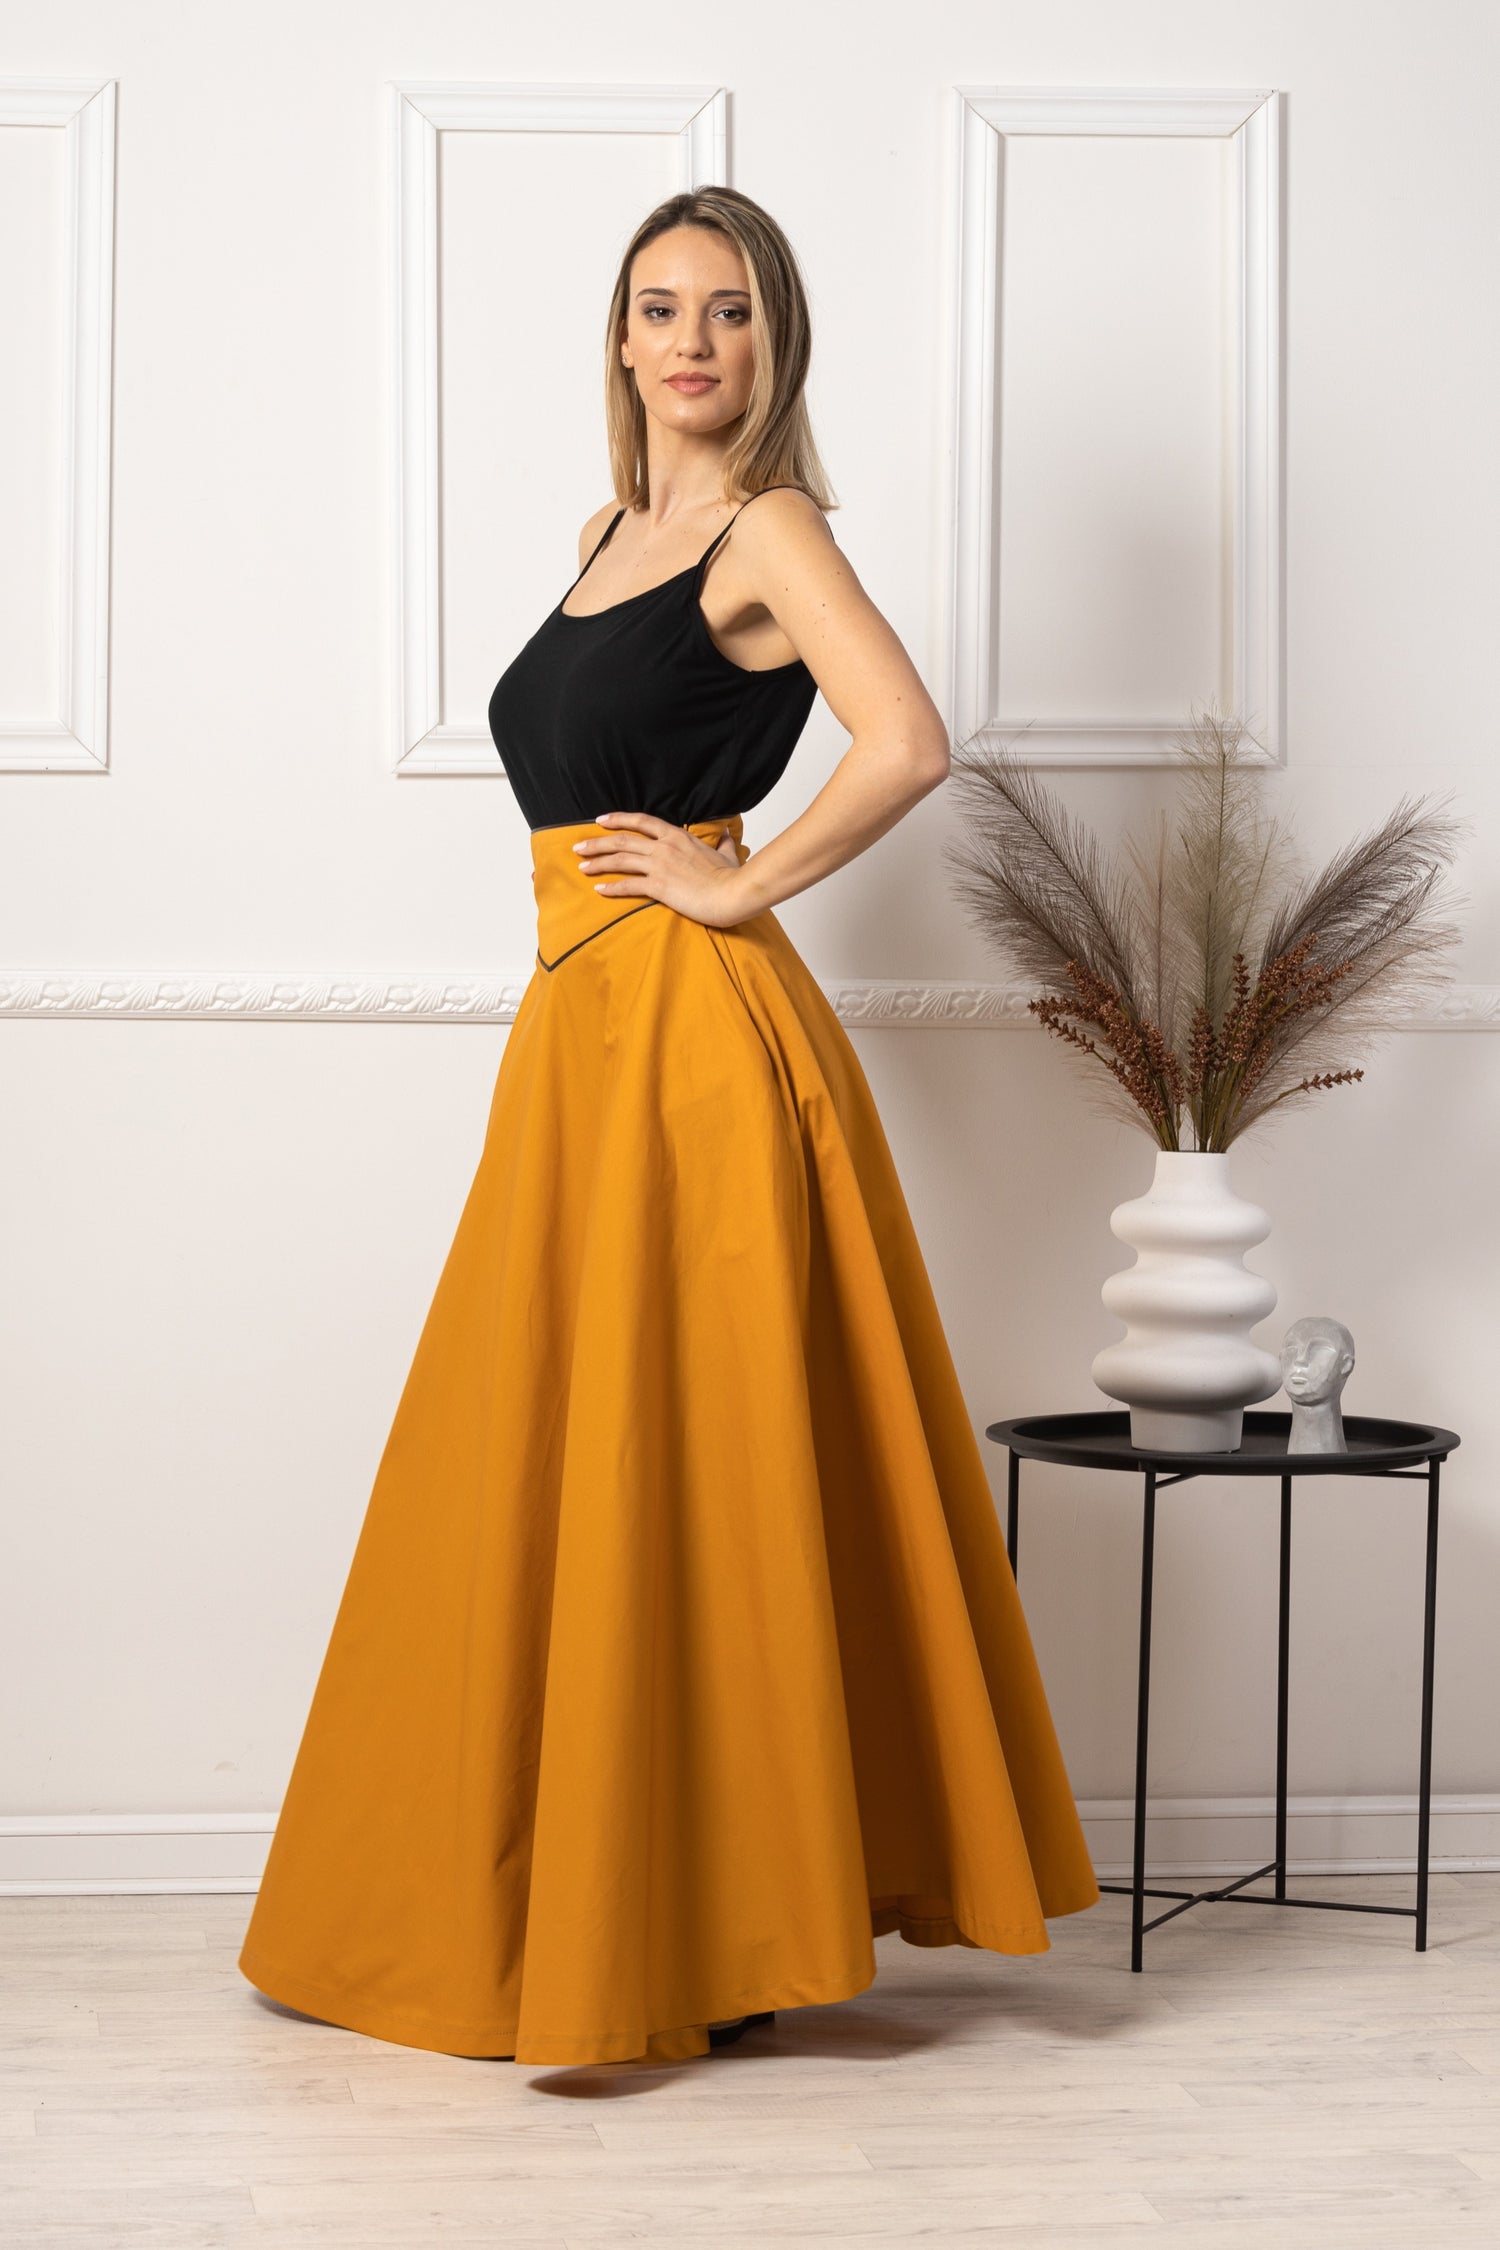 High Waist Victorian Skirt from NikkaPlace | Effortless fashion for easy livingHigh Waist Victorian Skirt styled with a blouse and heels from NikkaPlace | Effortless fashion for easy living